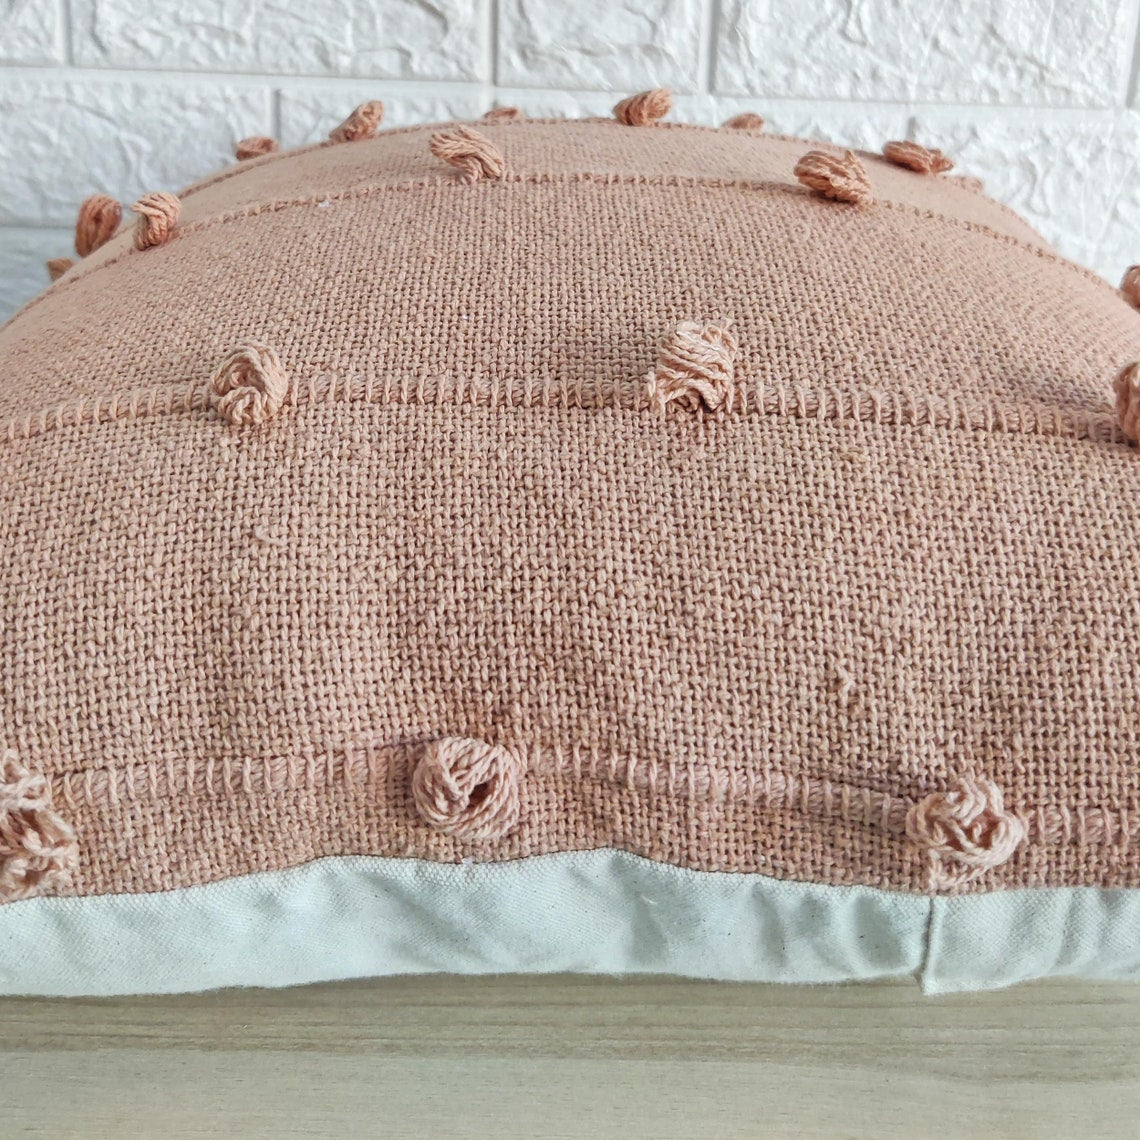 Blush Pink Natural Raw Cotton Hand Loom Woven Textured Fabric Cushion Cover